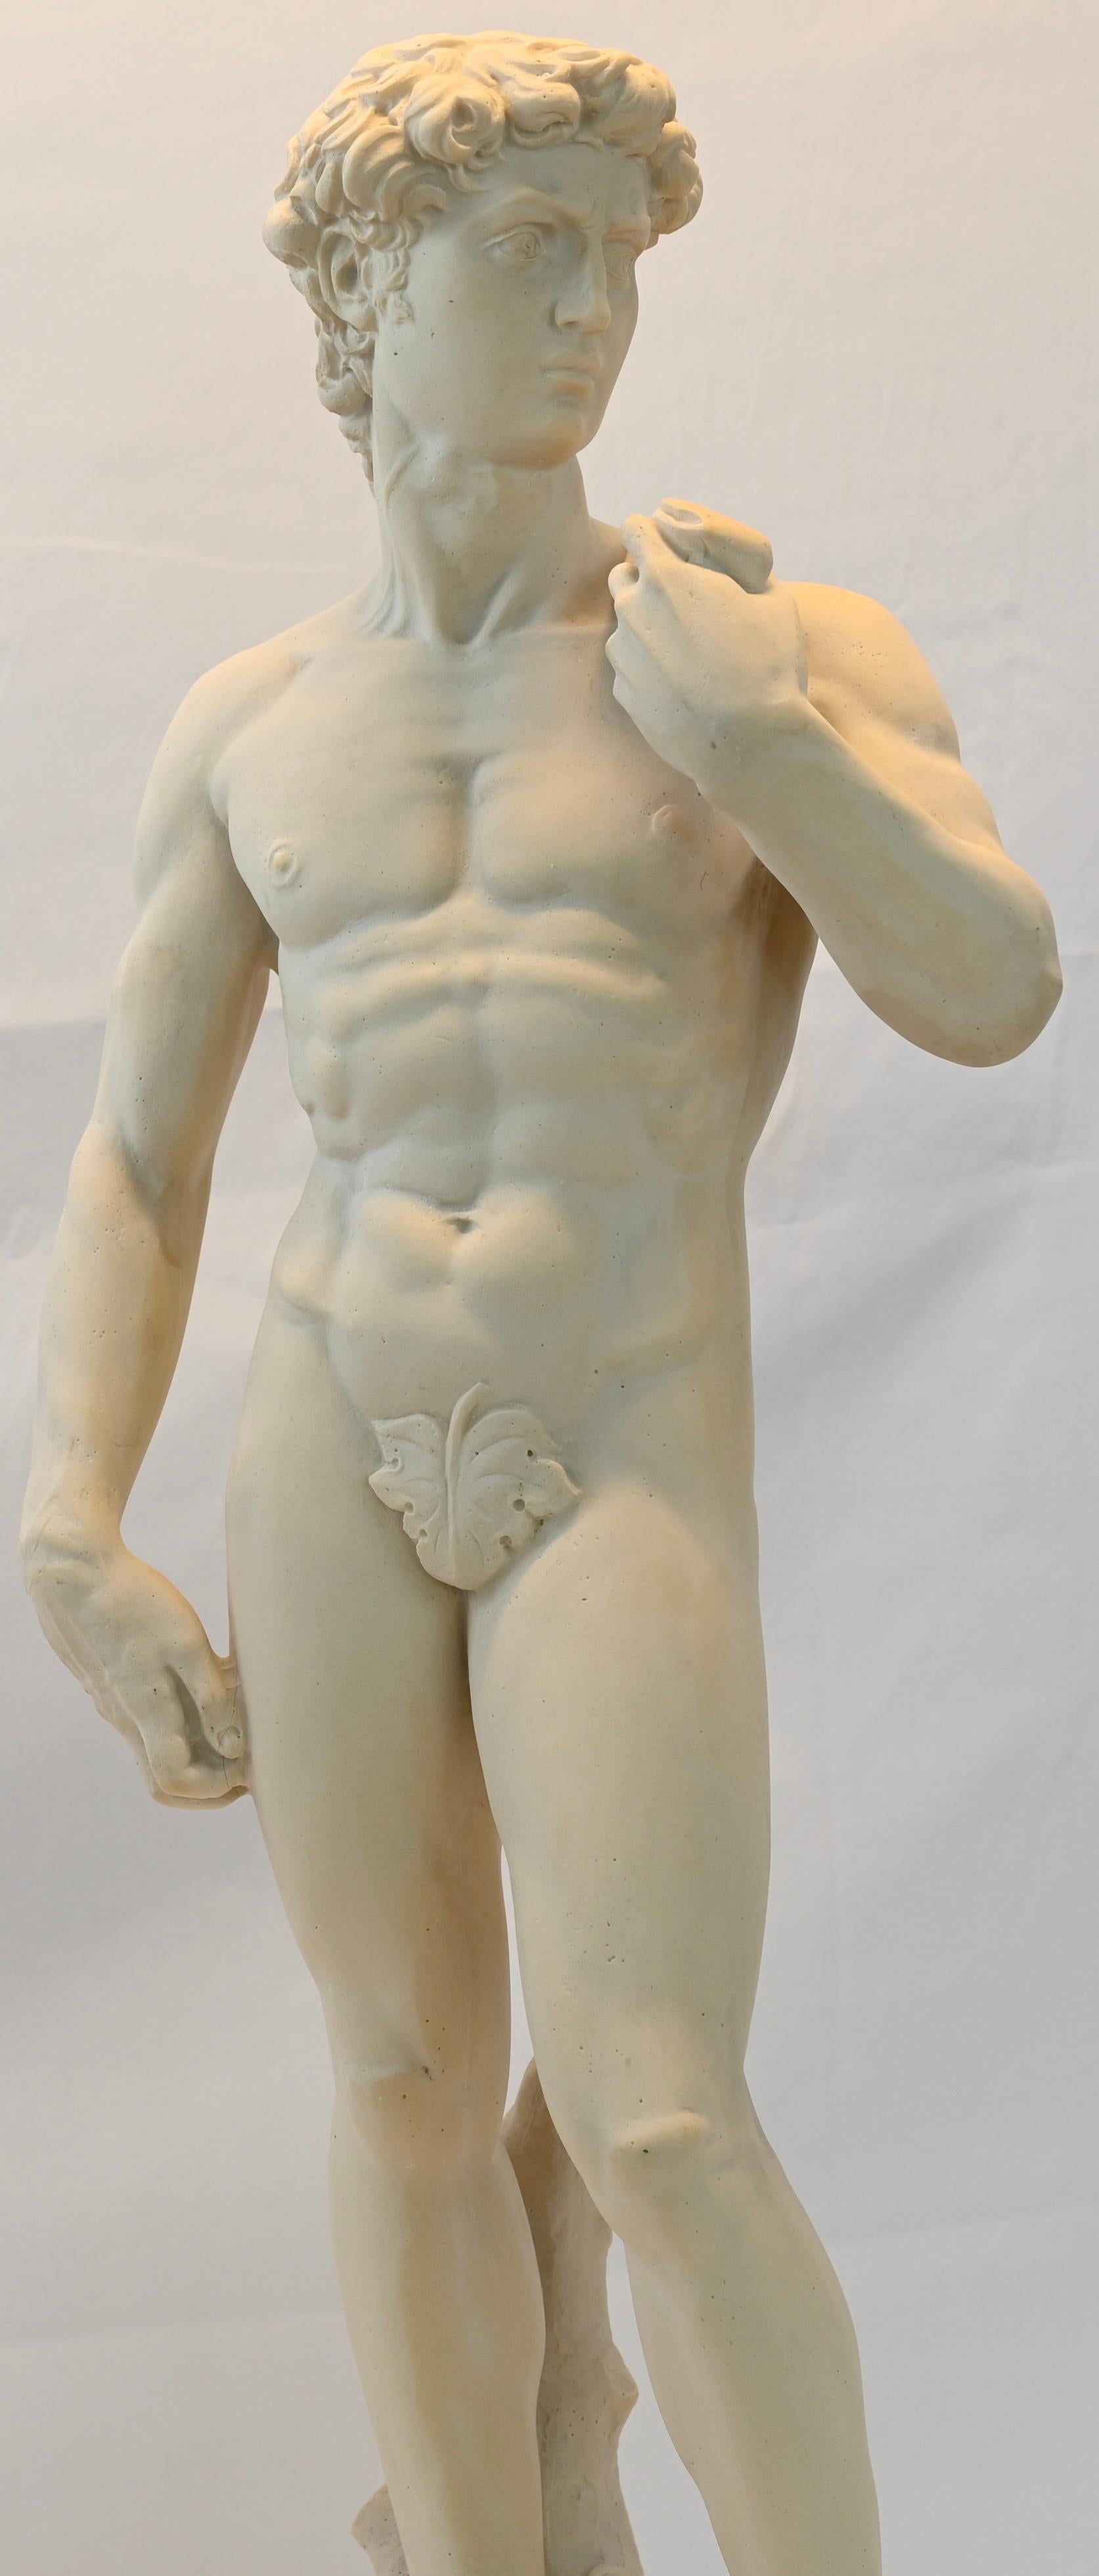 Stunning Roman Nude Male Marble Sculpture Italian or statue of David.
Well executed and wonderfully proportioned figure of David as a youth, copied from the original by Michelangelo at the Galleria dell'Accademia, Florence, Italy.

The original